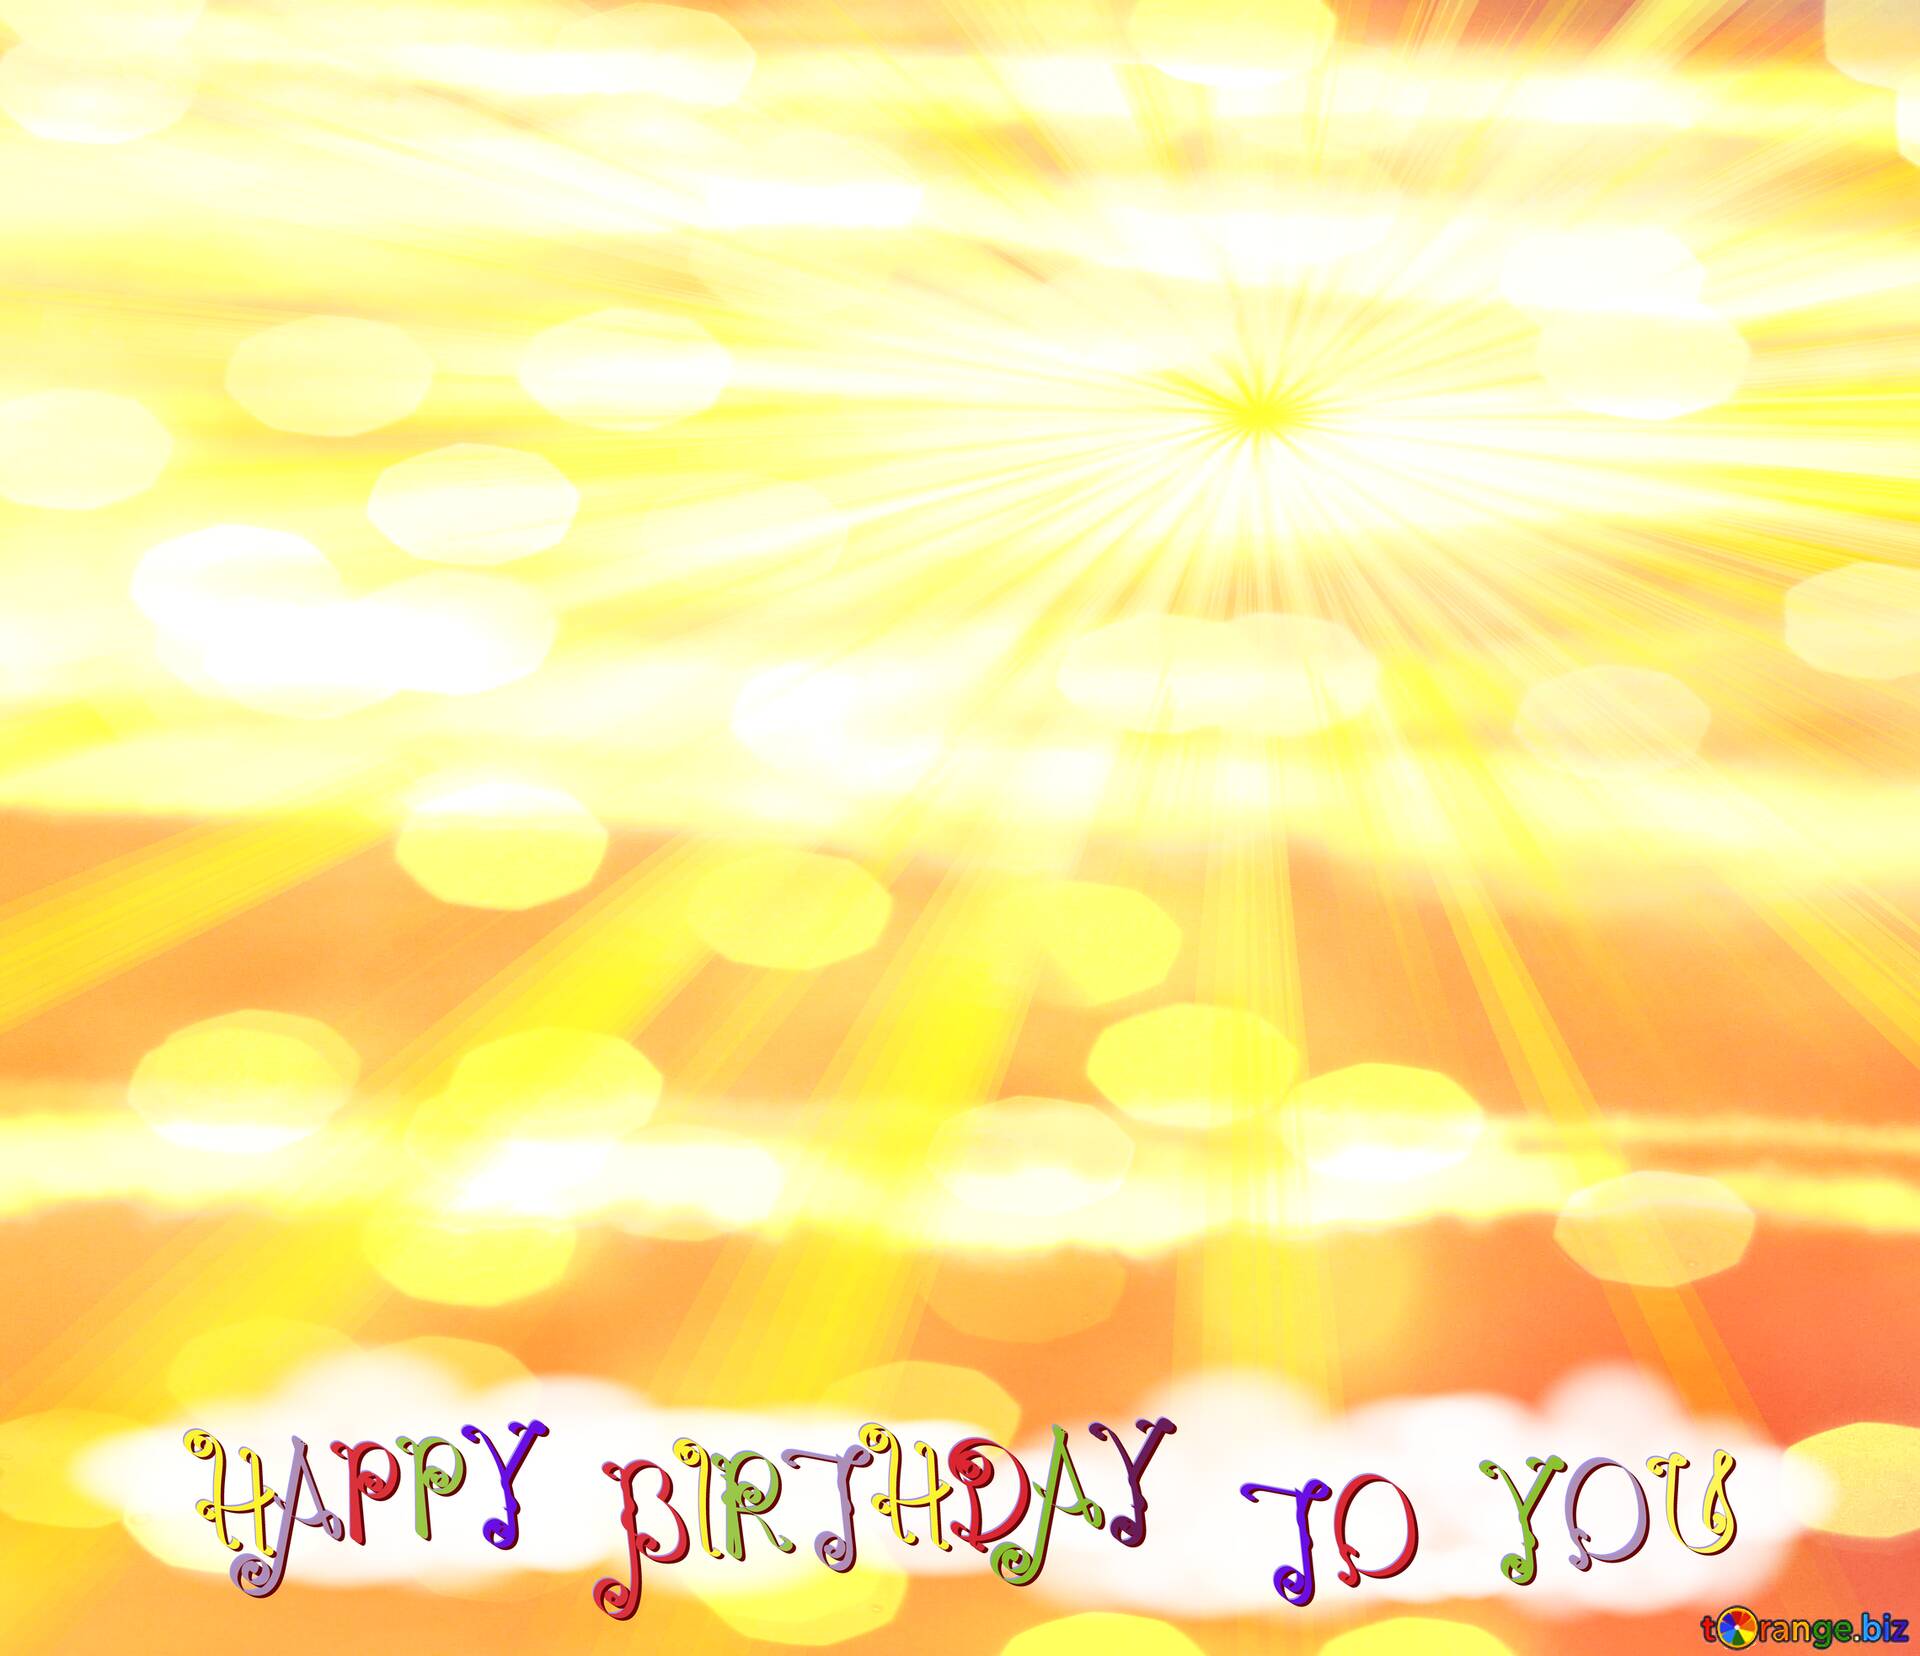 Download free picture Greeting card Happy Birthday Background on CC-BY  License ~ Free Image Stock  ~ fx №176415